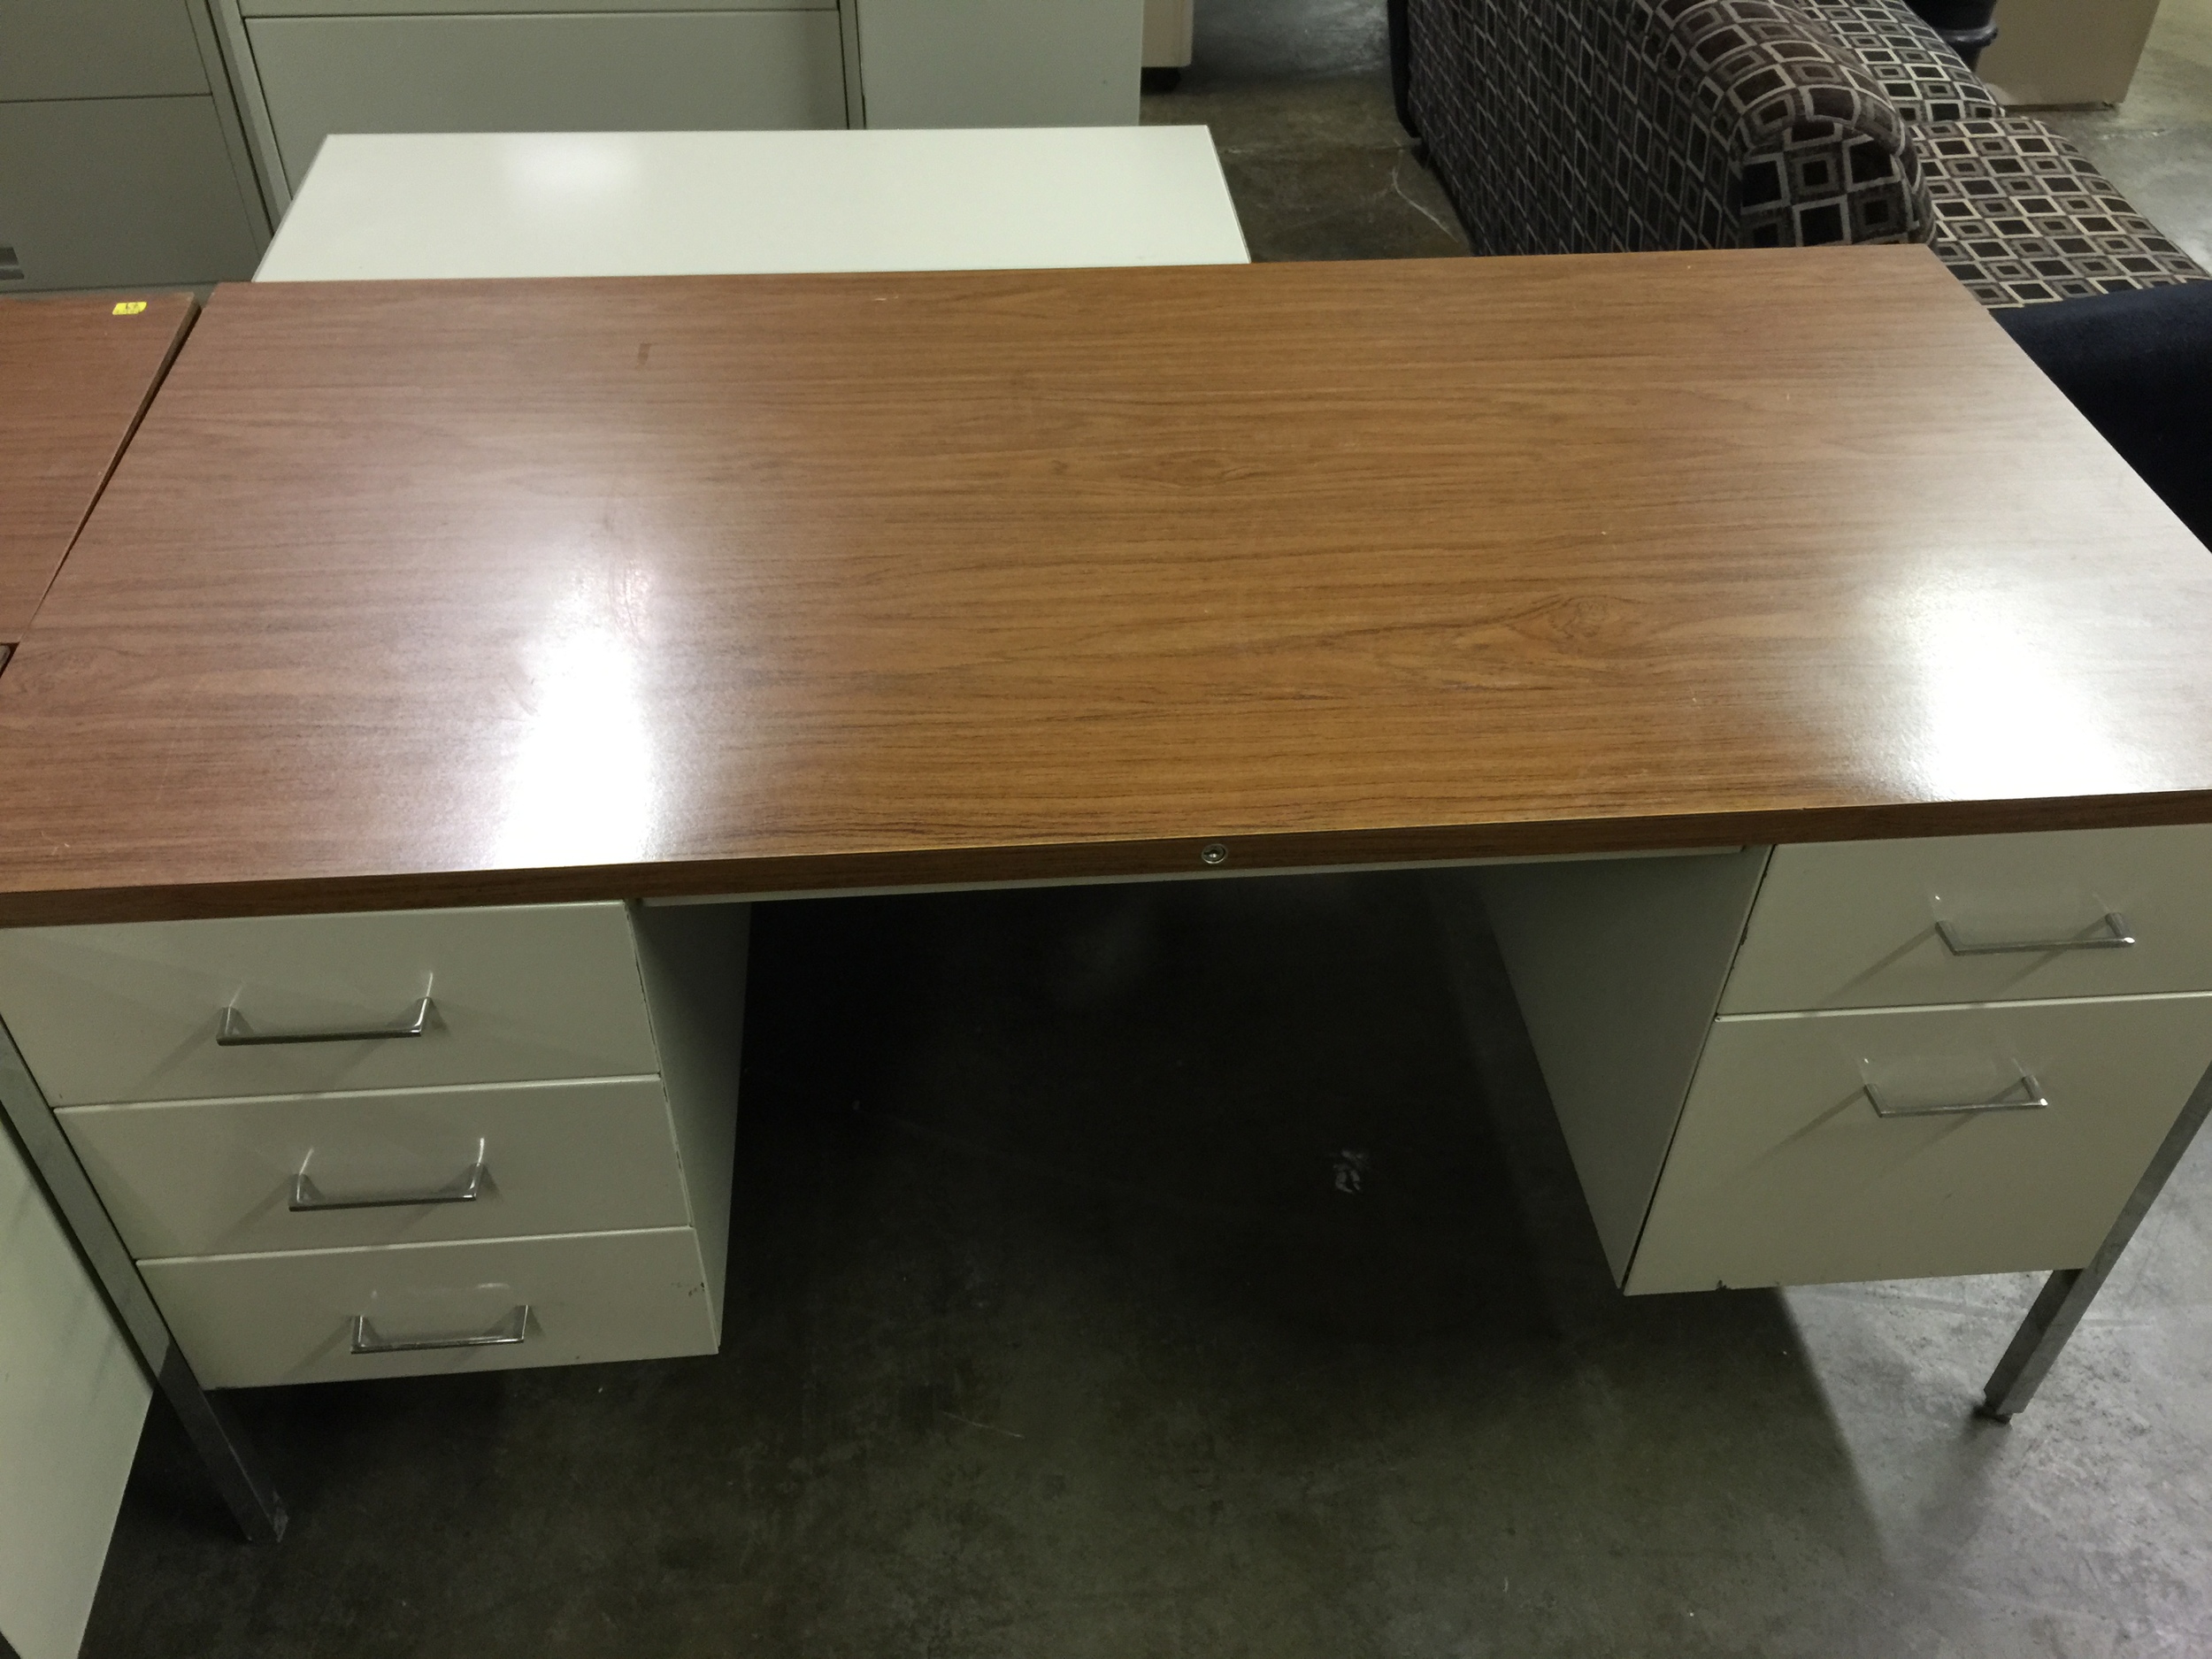 Steelcase Desk Metal With Wood Top Office Desk Hotel To